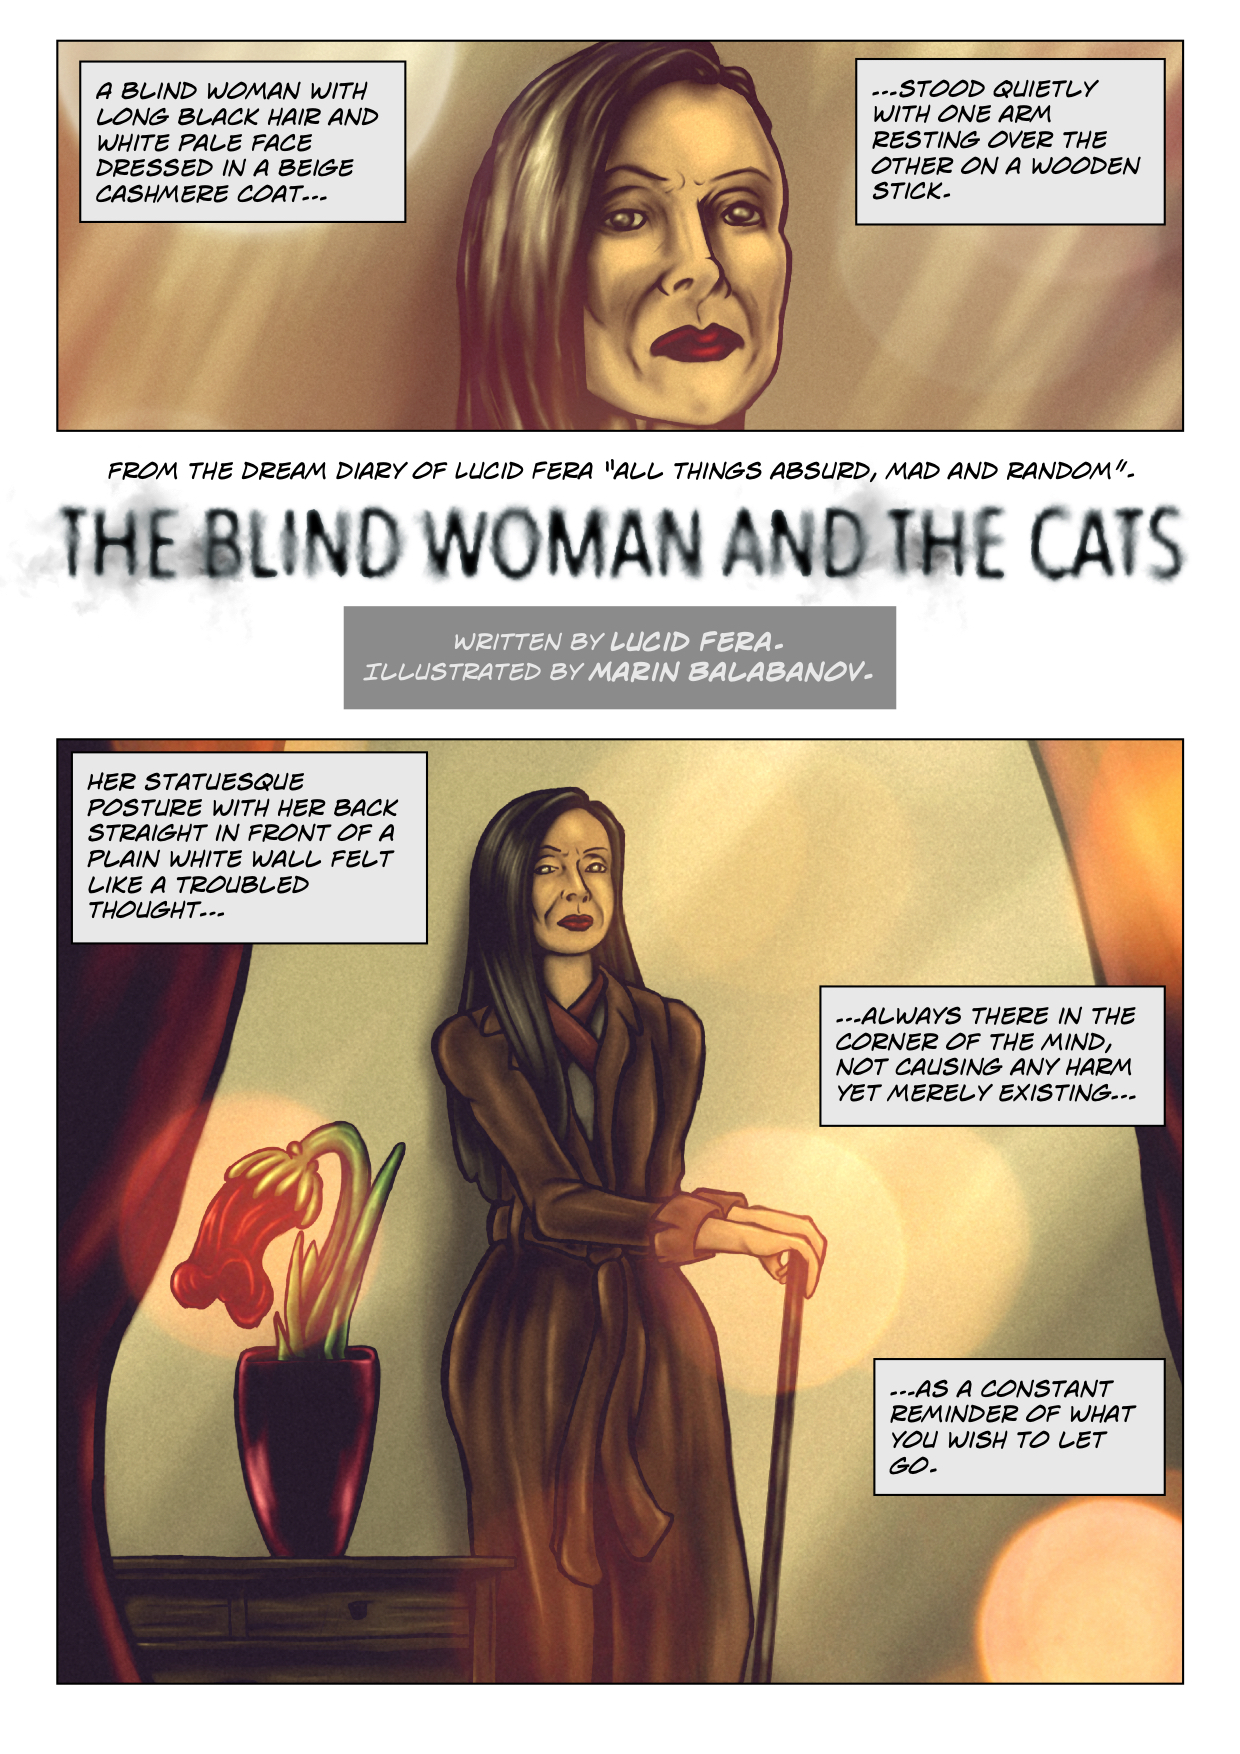 The Blind Woman and Cats - Original Page 1